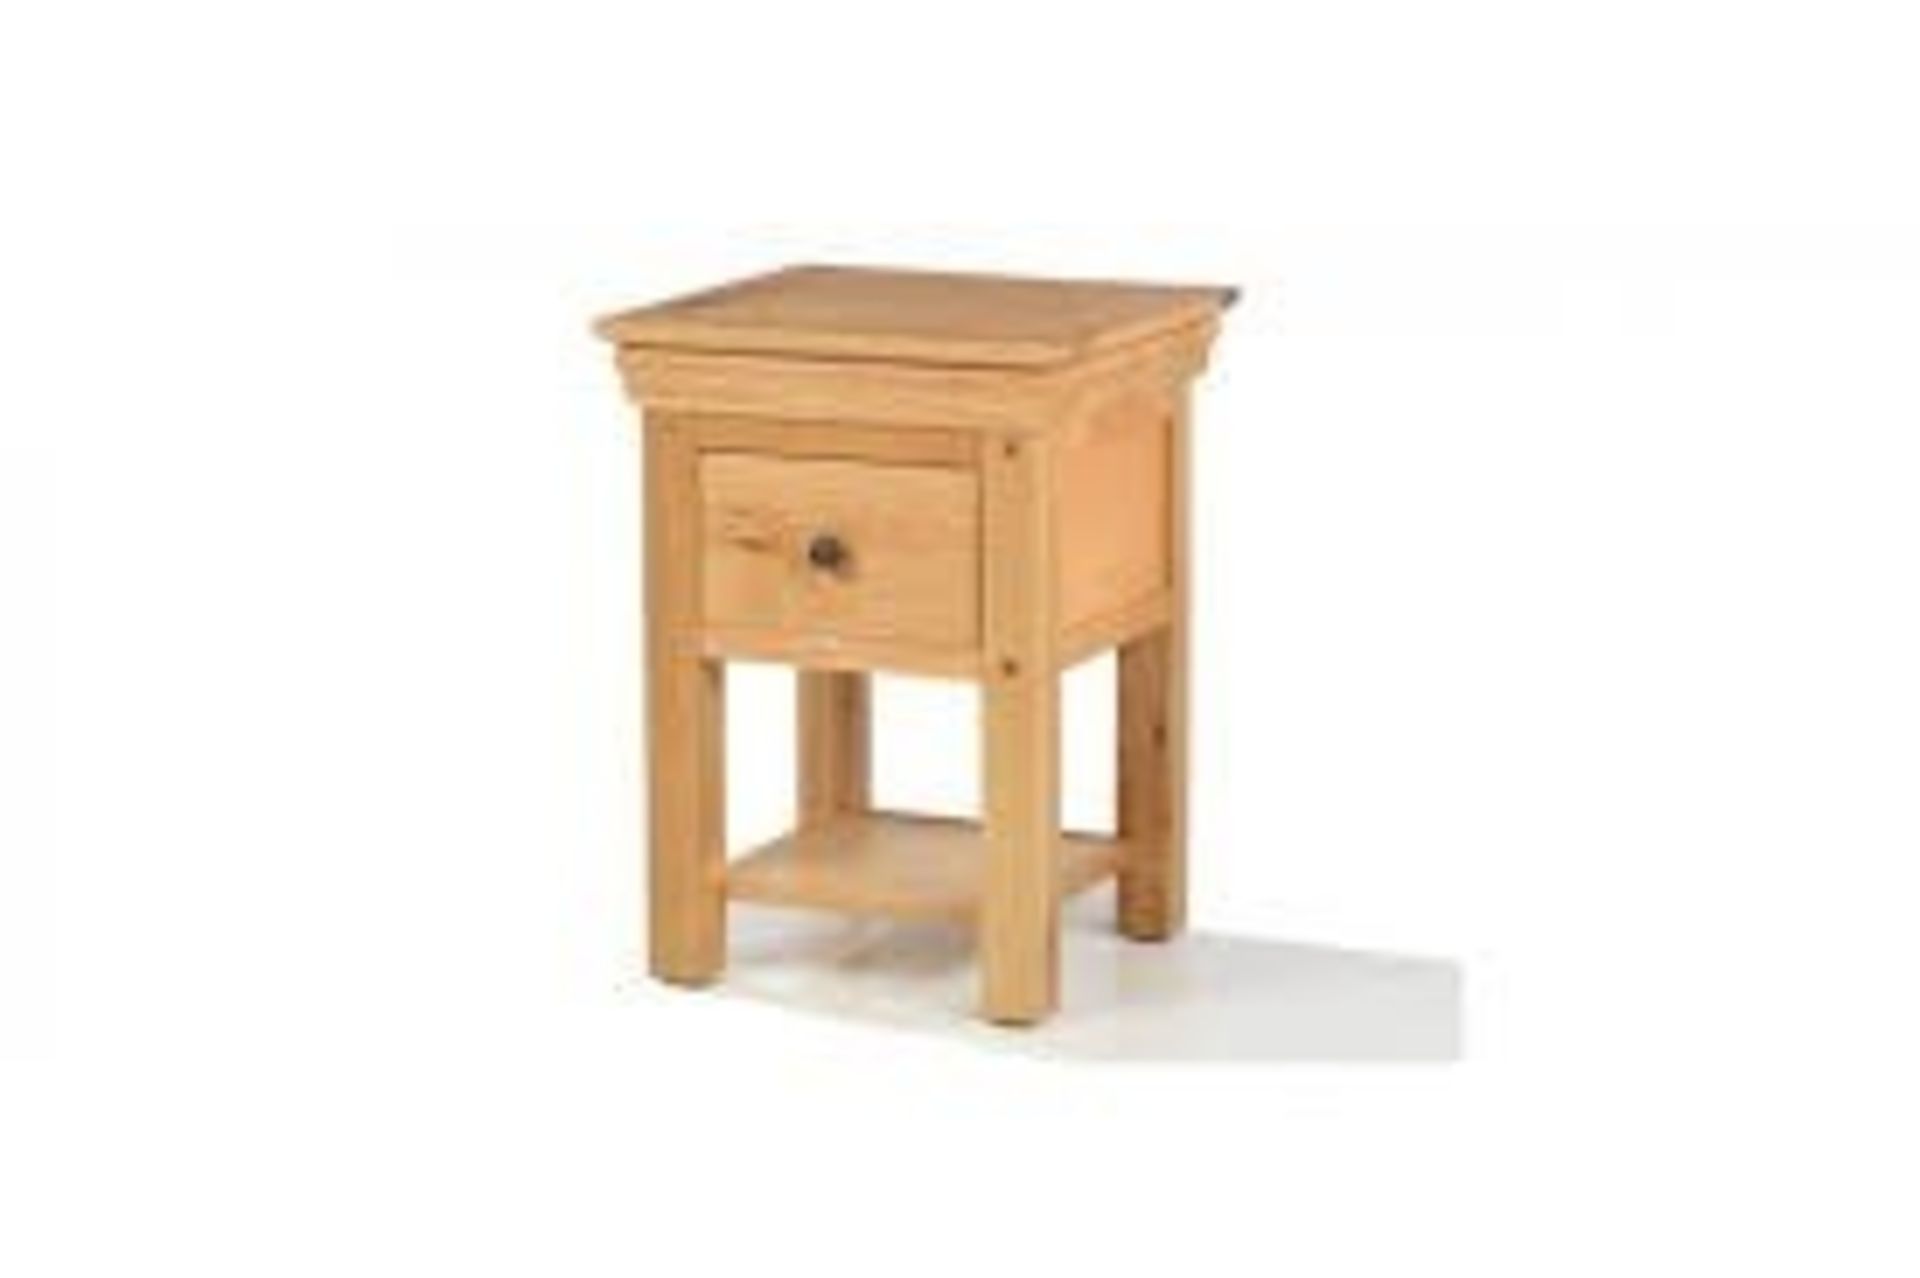 Boxed CD Drawer Oak Bedside Cabinet RRP £50 IMAGES ARE FOR ILLUSTRATION PURPOSES ONLY AND MAY NOT BE